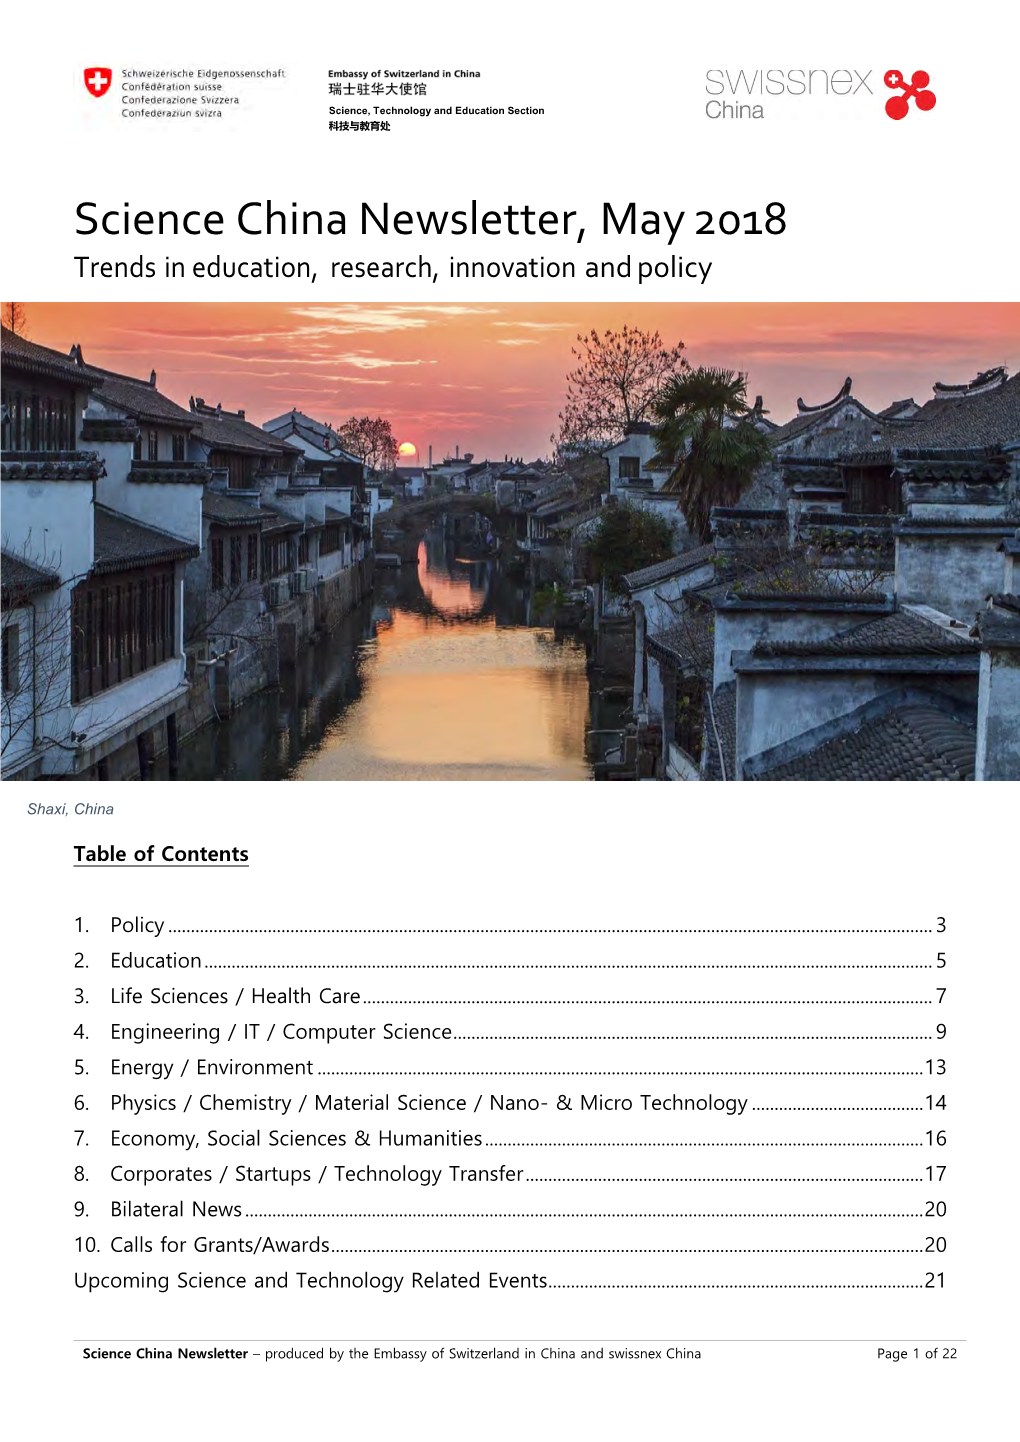 Science China Newsletter, May 2018 Trends in Education, Research, Innovation and Policy